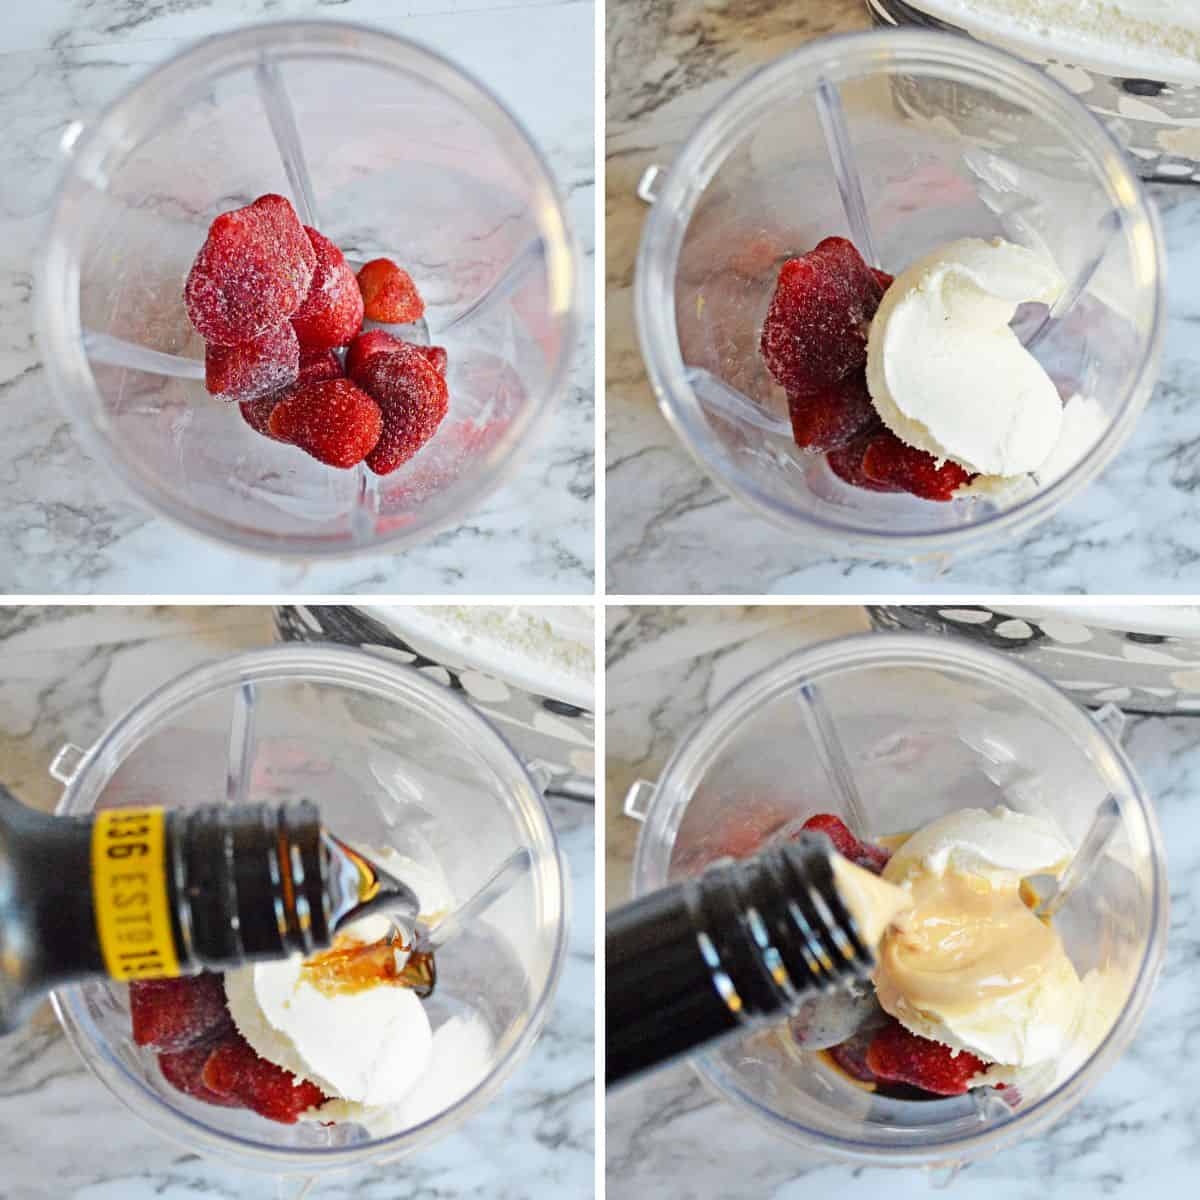 Step-by-step photo collage showing frozen strawberries, vanilla ice cream, and alcohol being added to blender.